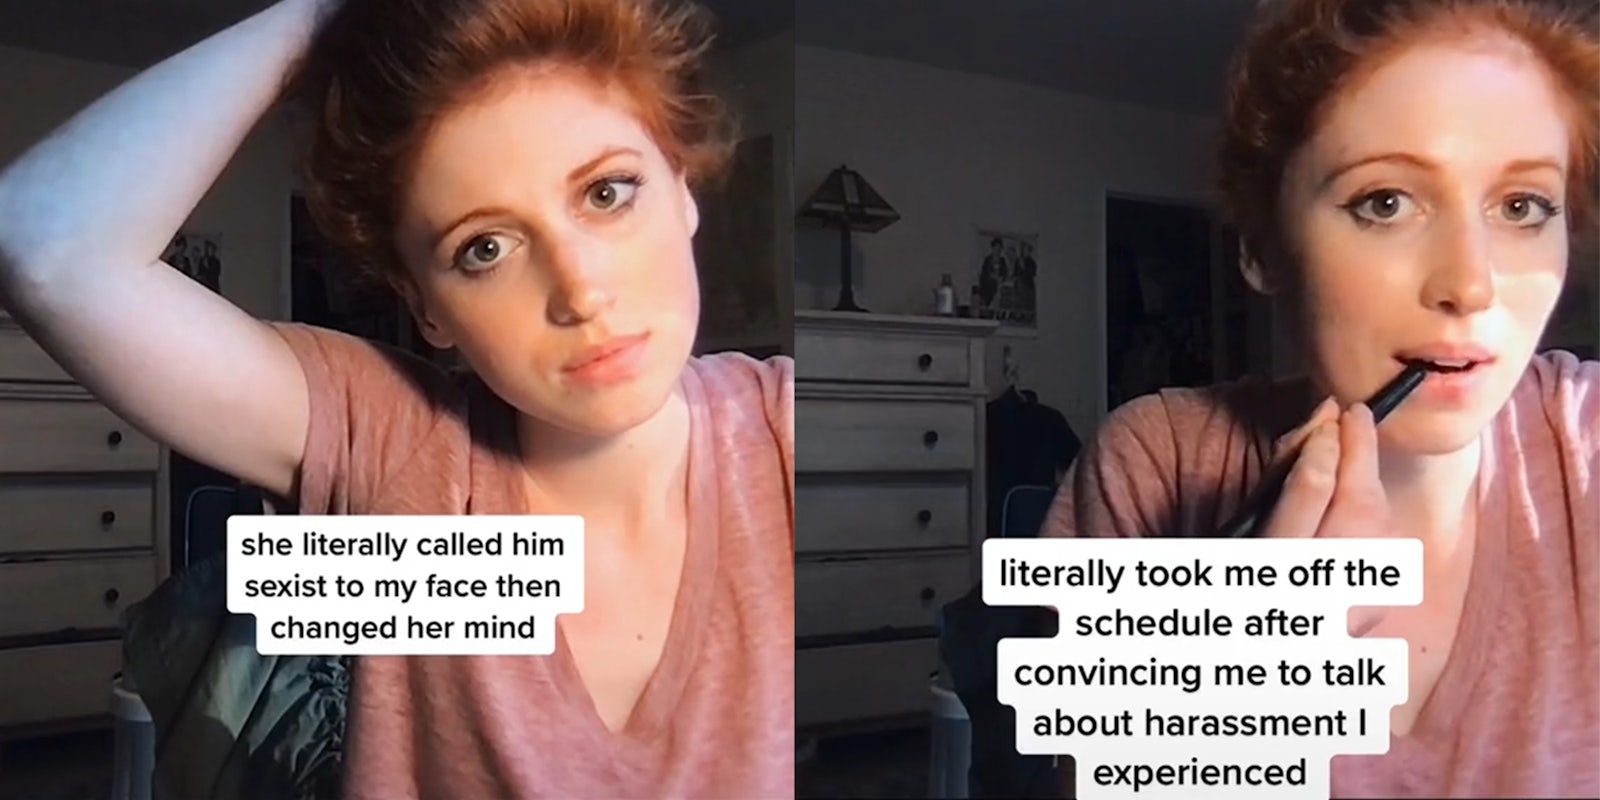 woman holding hair with caption 'she literally called him sexist to my face then changed her mind' (l) woman with makeup pen in her mouth with caption 'literally took me off the schedule after convincing me to talk about harassment I experienced' (r)